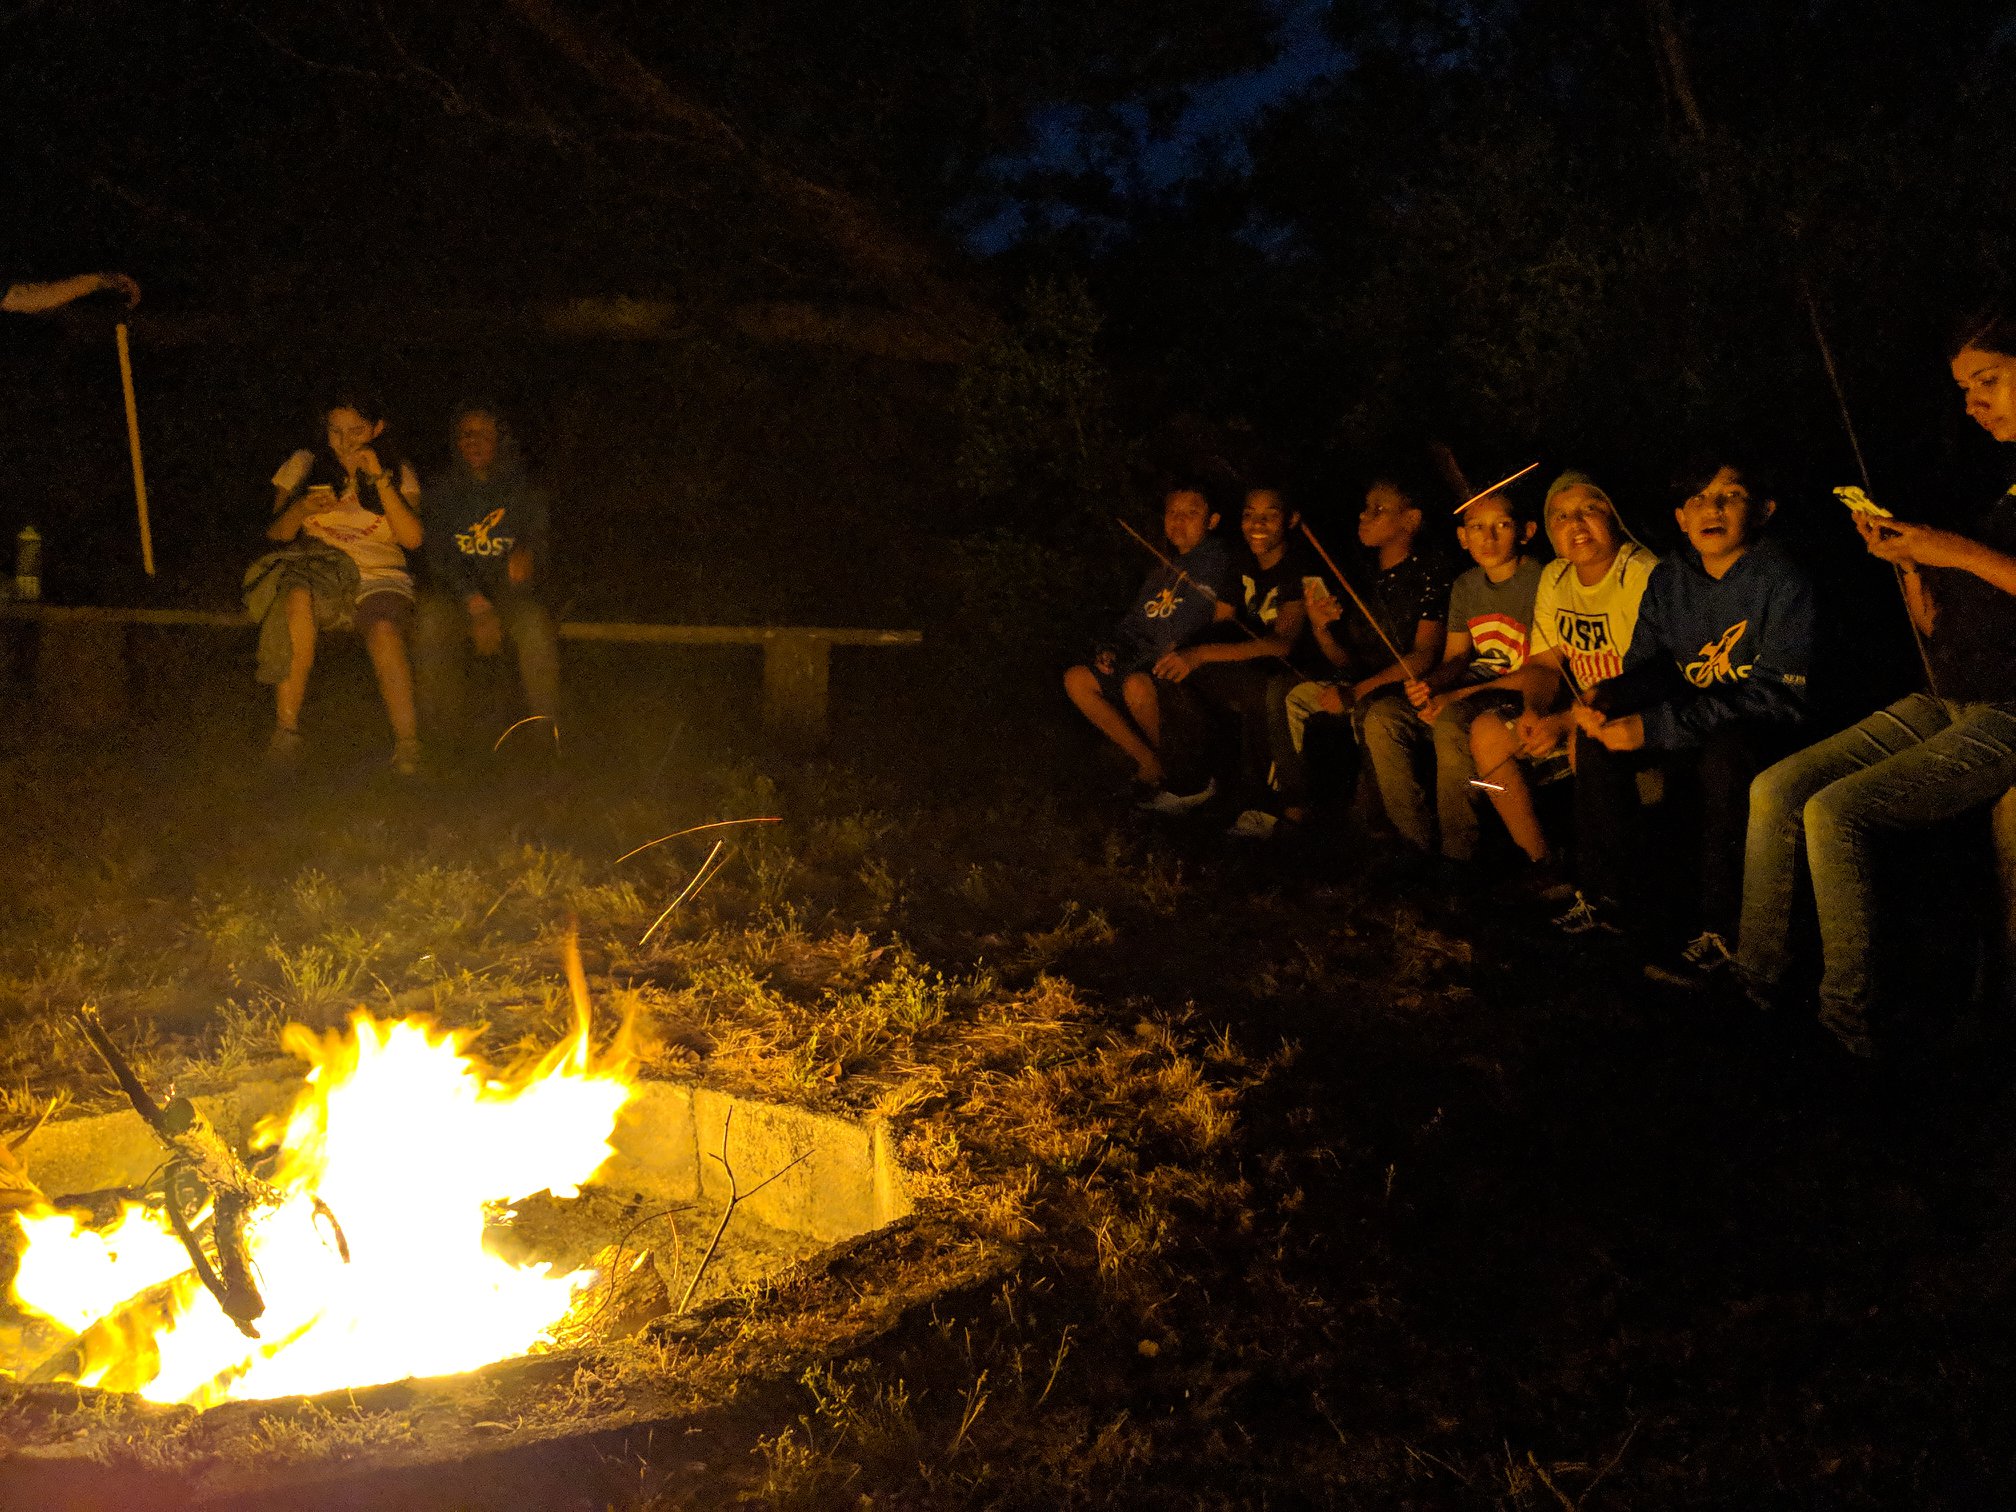 BOOST scholars tell stories around the annual Trinity Center campfire